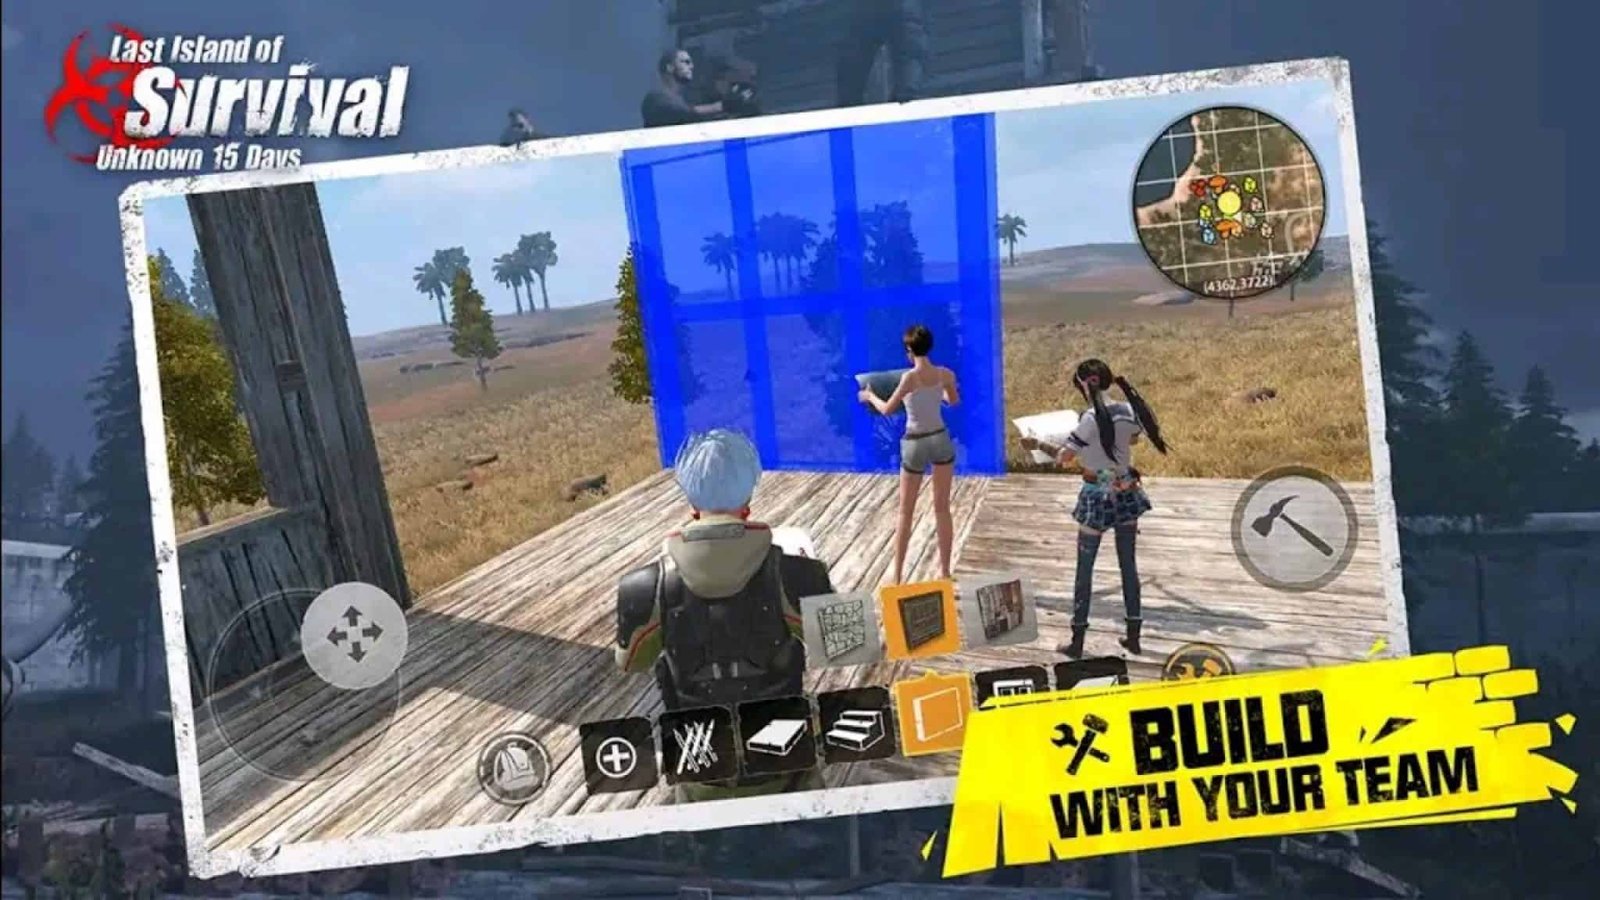 Чит на last island of survival. Ласт Исланд 15 дейс. Last Island of Survival Unknown 15 Days. Last Island of Survival. Игра last Day Rules Survival.